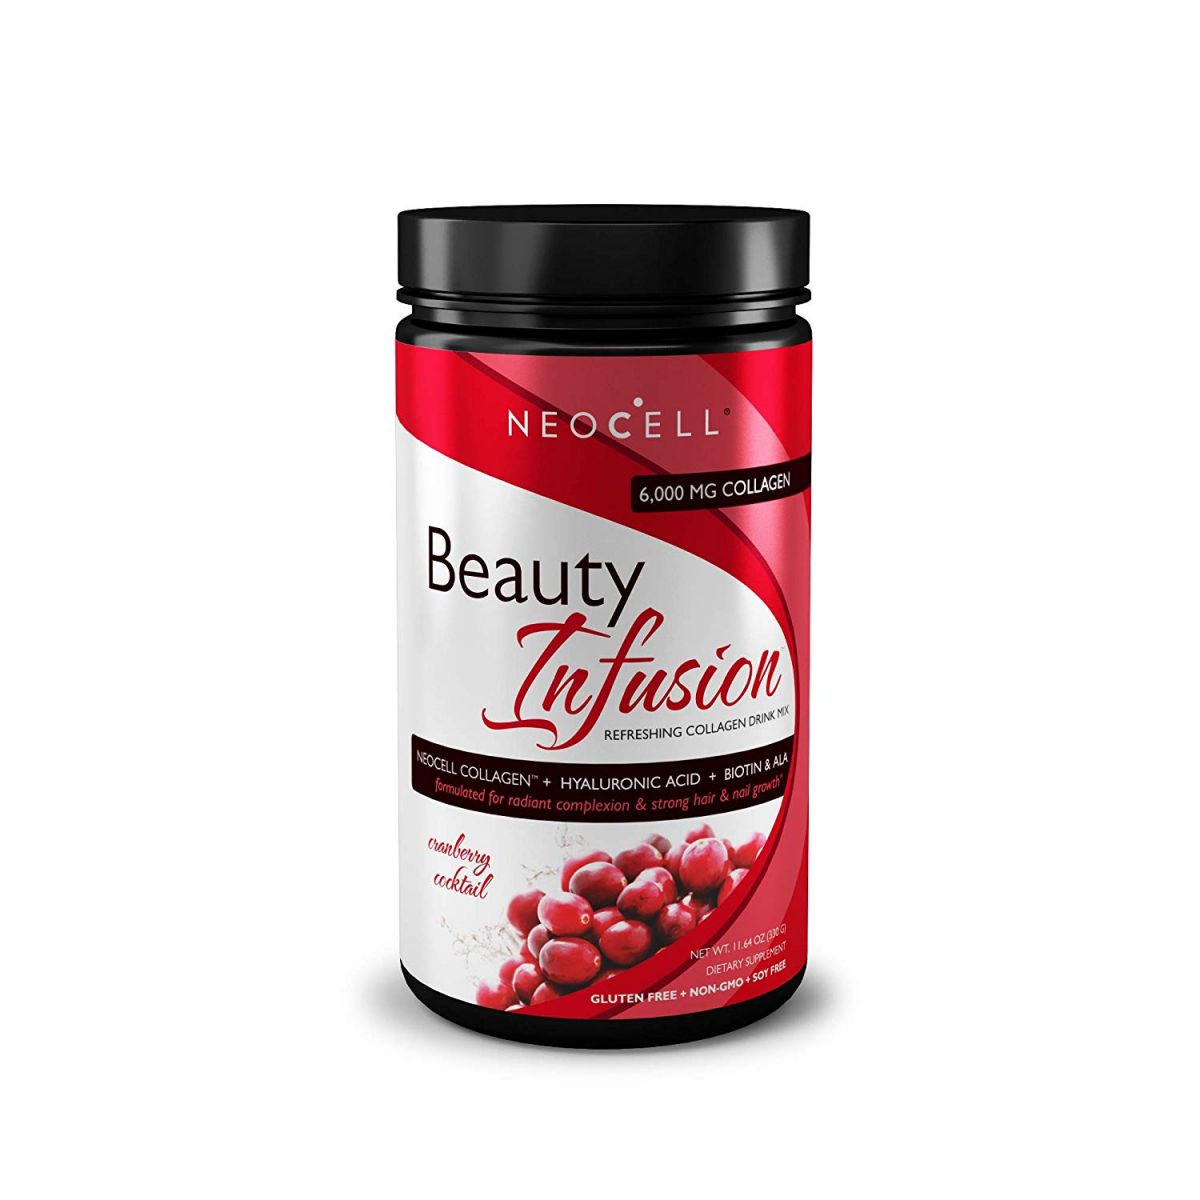 neocell-beauty-infusion-cranberry-cocktail-450g-cua-my